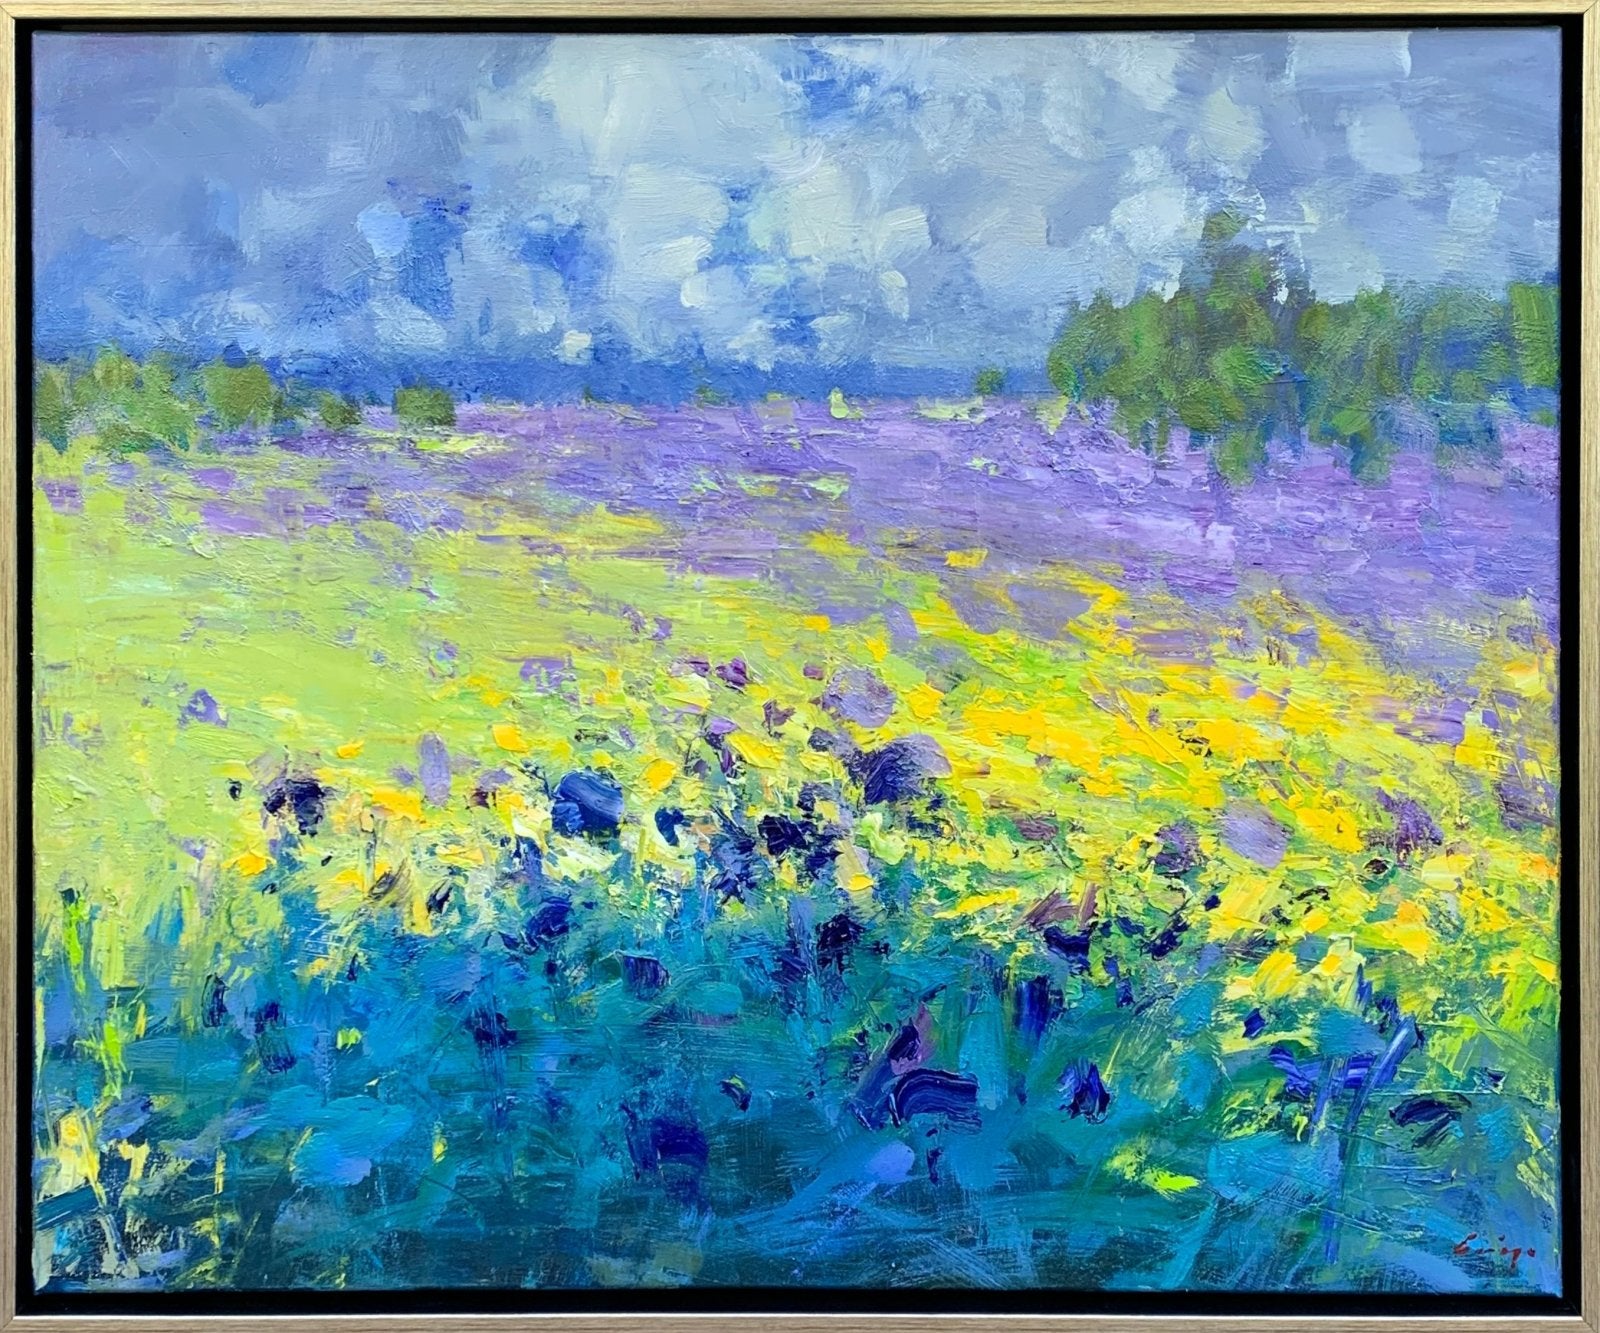 Iris and Lavender Field by Ning Lee at LePrince Galleries